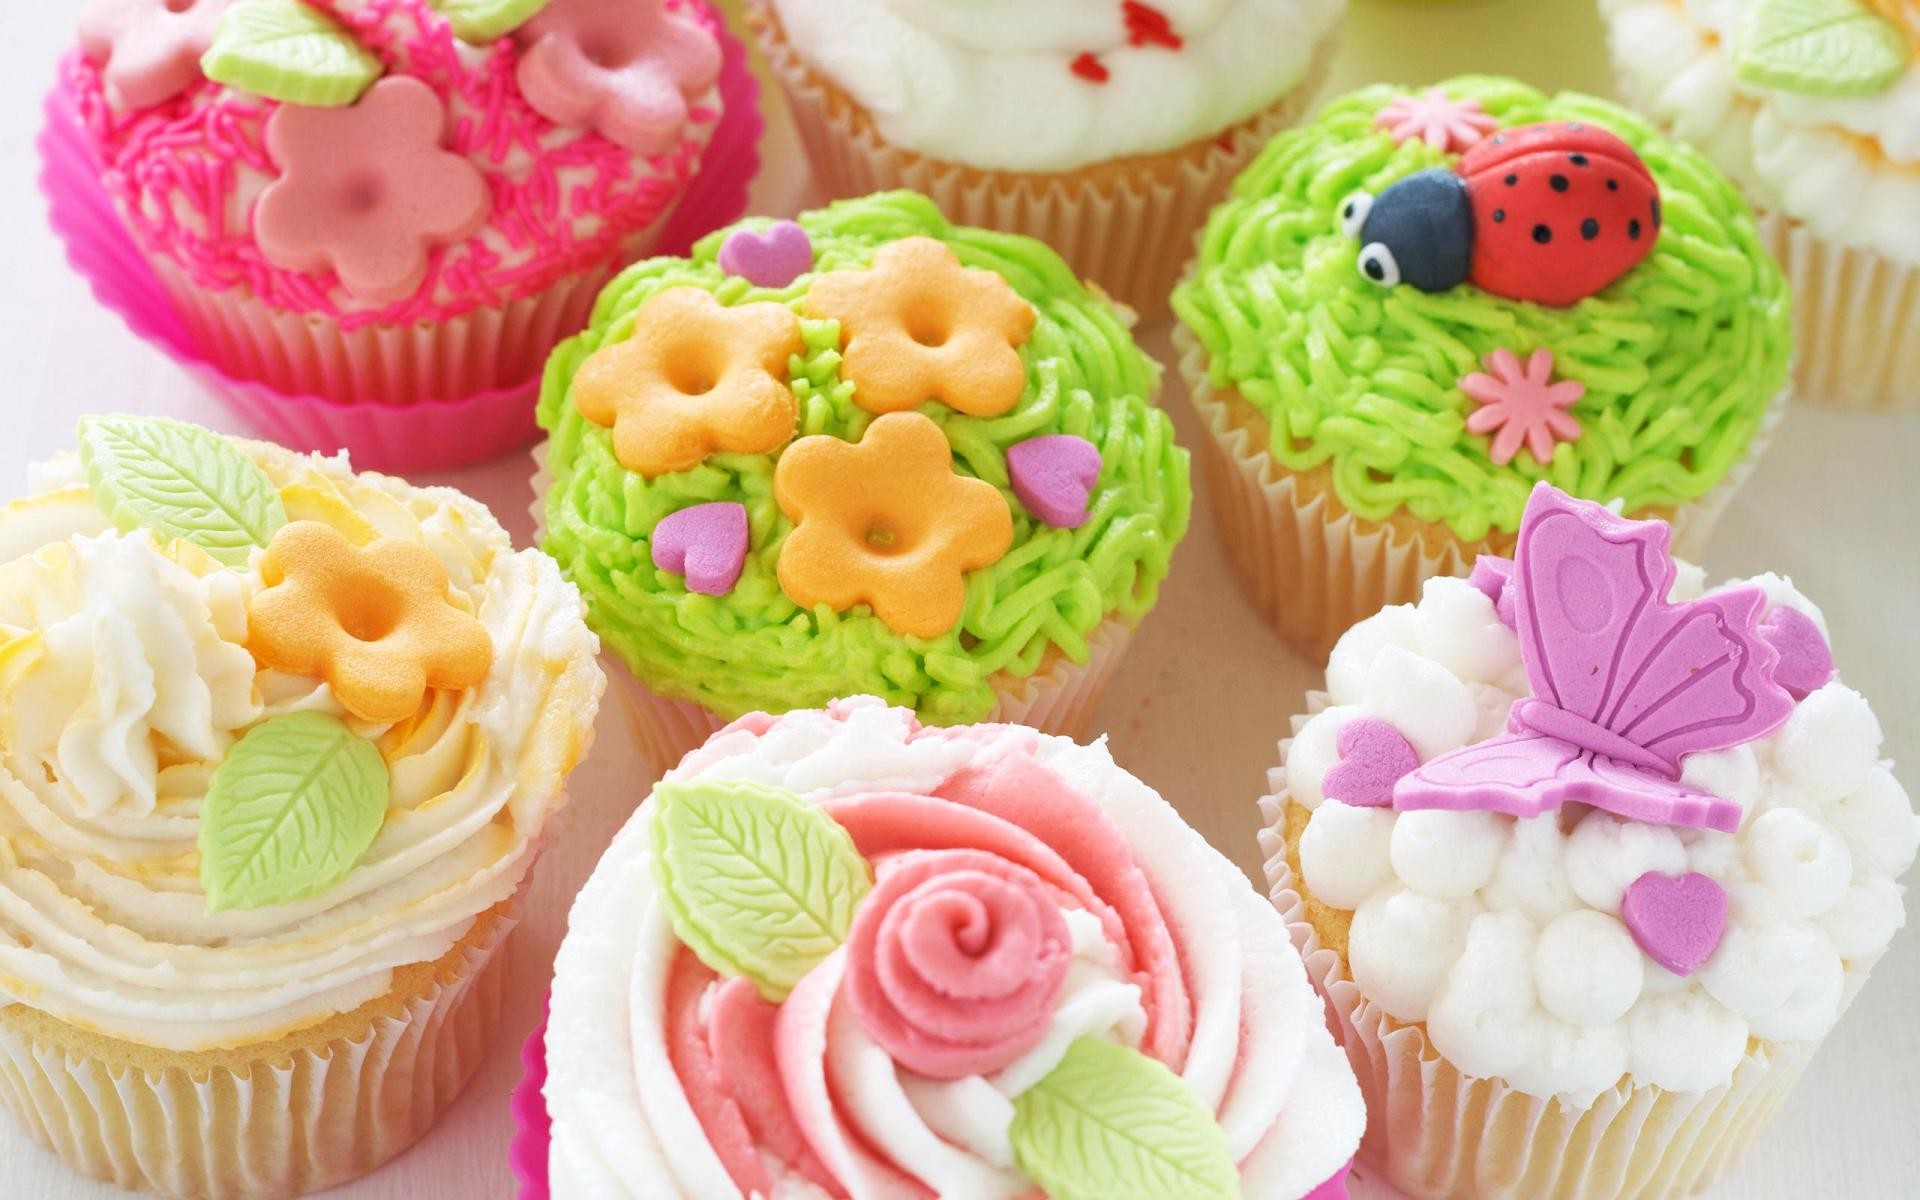 1920x1200 Wallpaper Cupcakes - 1920 x 1200 - Food Drinks Cocktails Cake Meat .